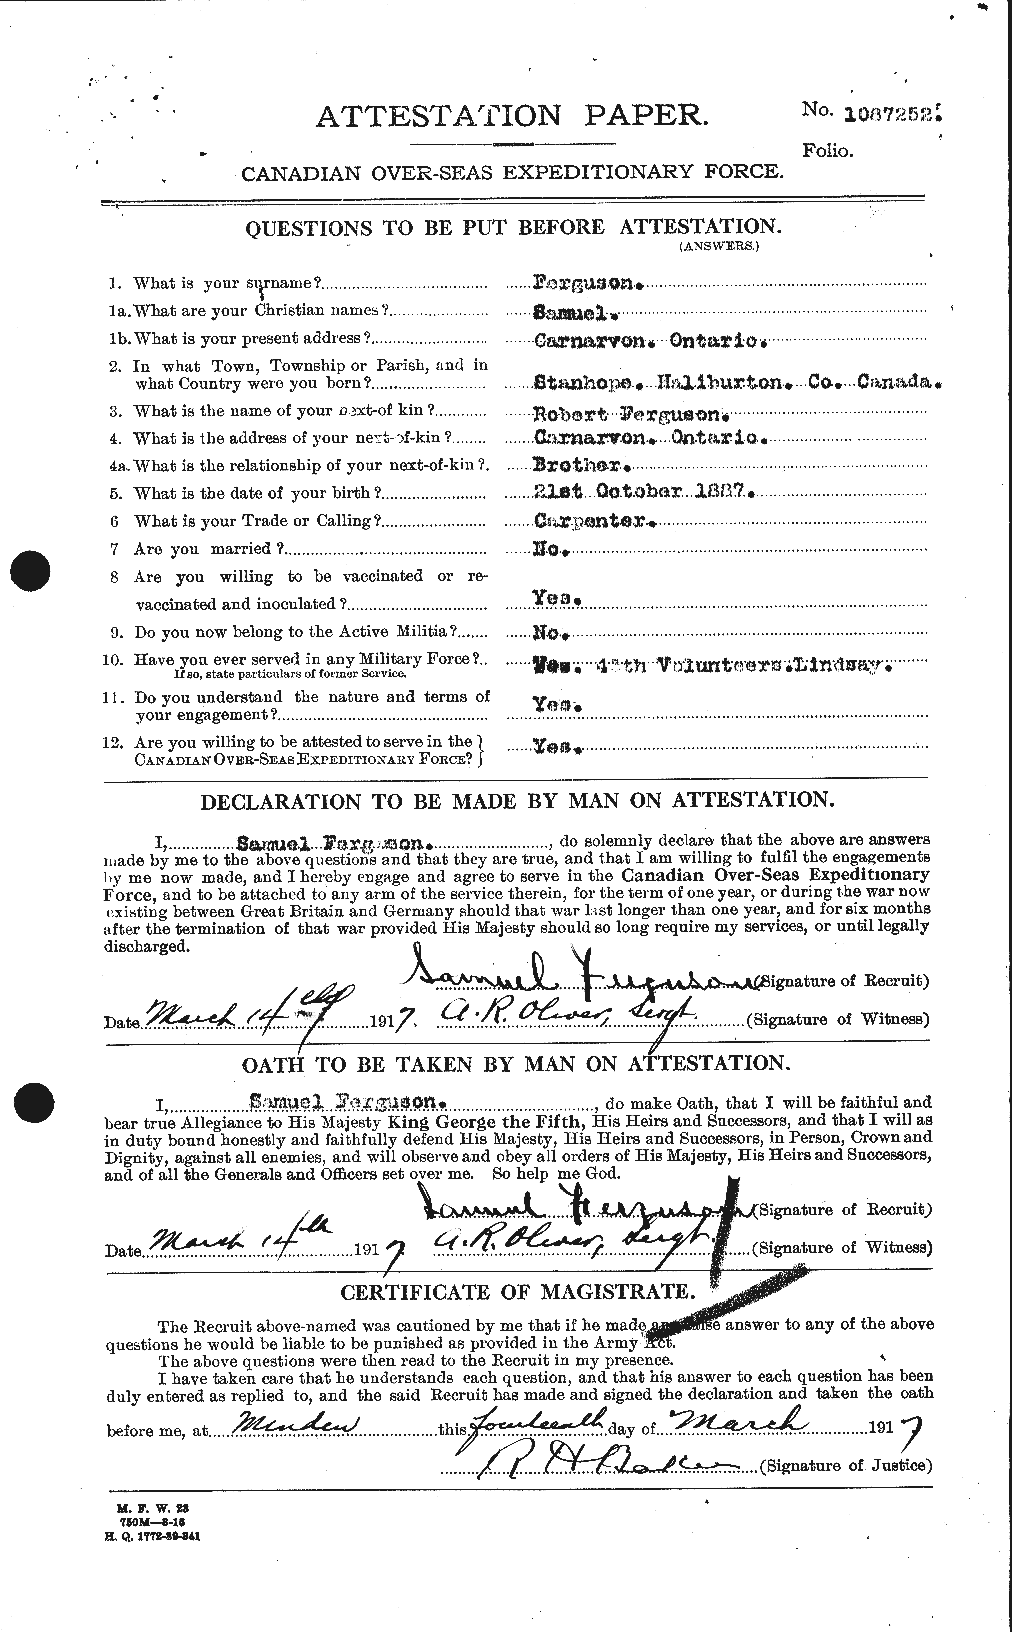 Personnel Records of the First World War - CEF 321652a